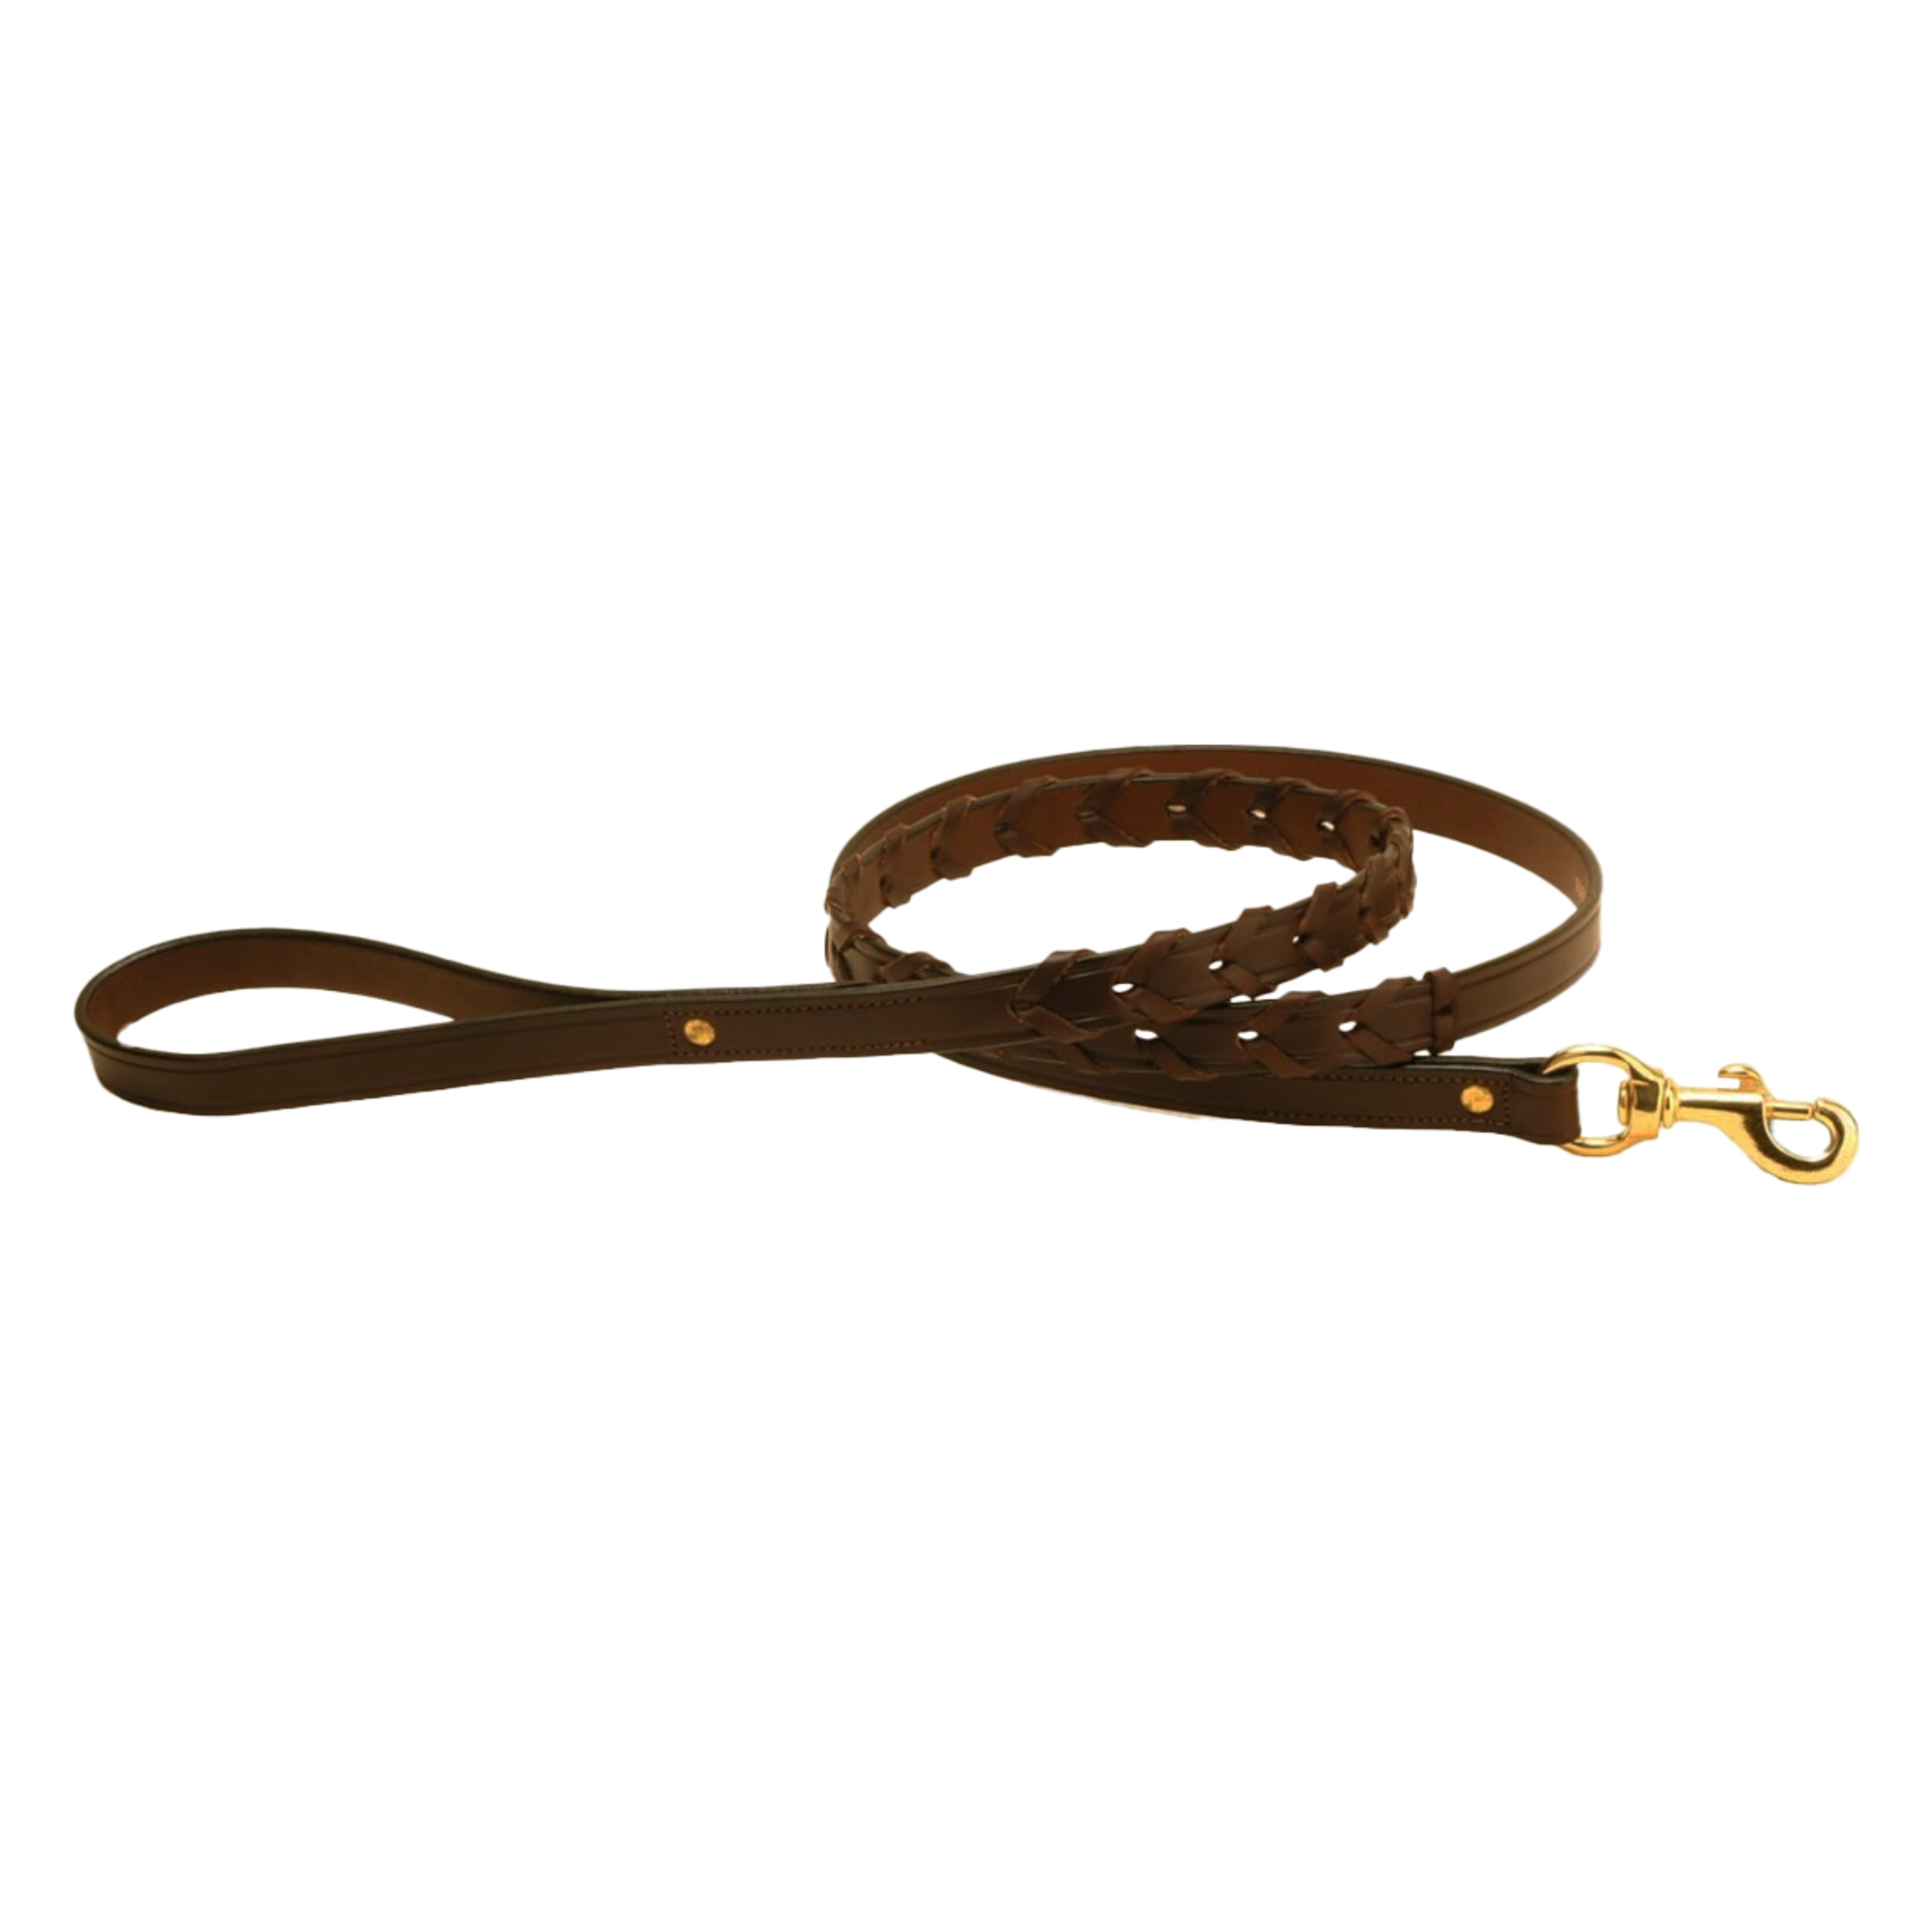 Tory Leather Dog Leash Laced Rein